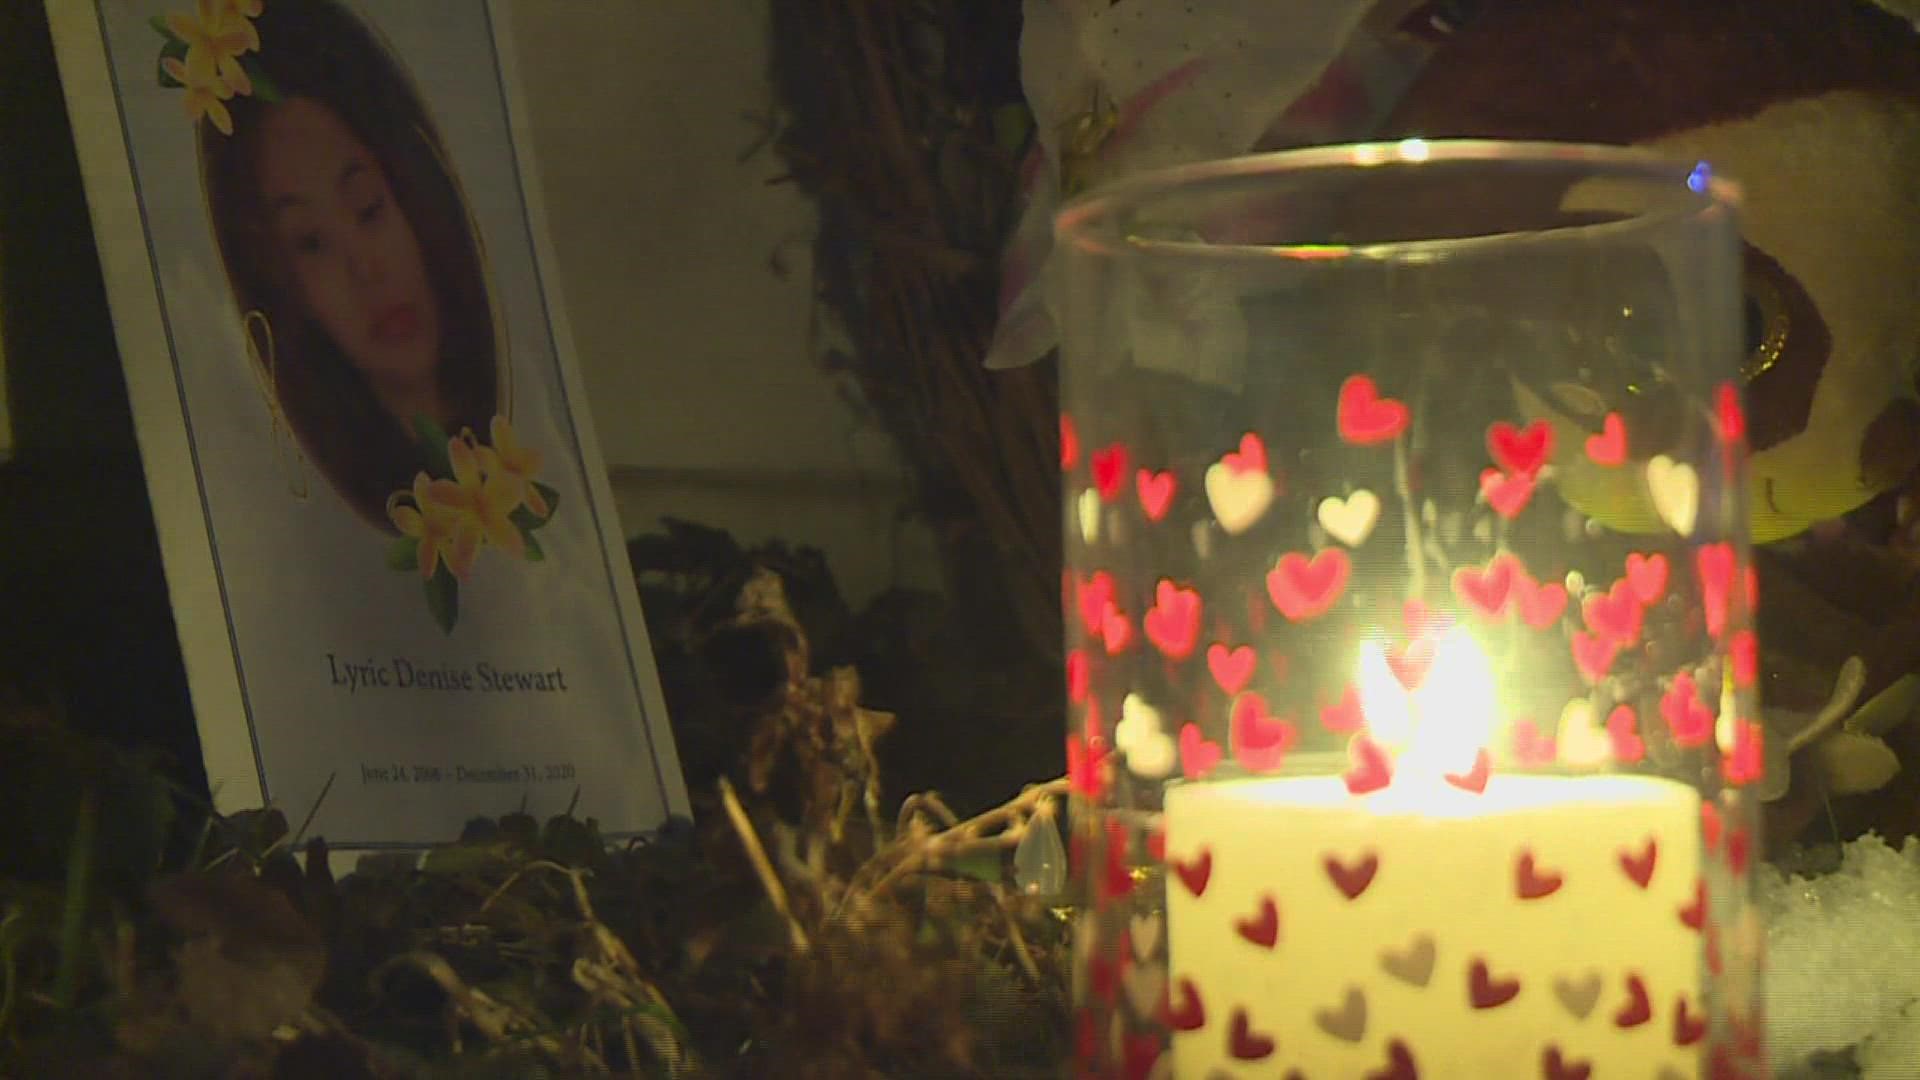 Family and friends held a candlelight vigil and balloon release for 14-year-old Lyric Steward on the one-year anniversary of her death.